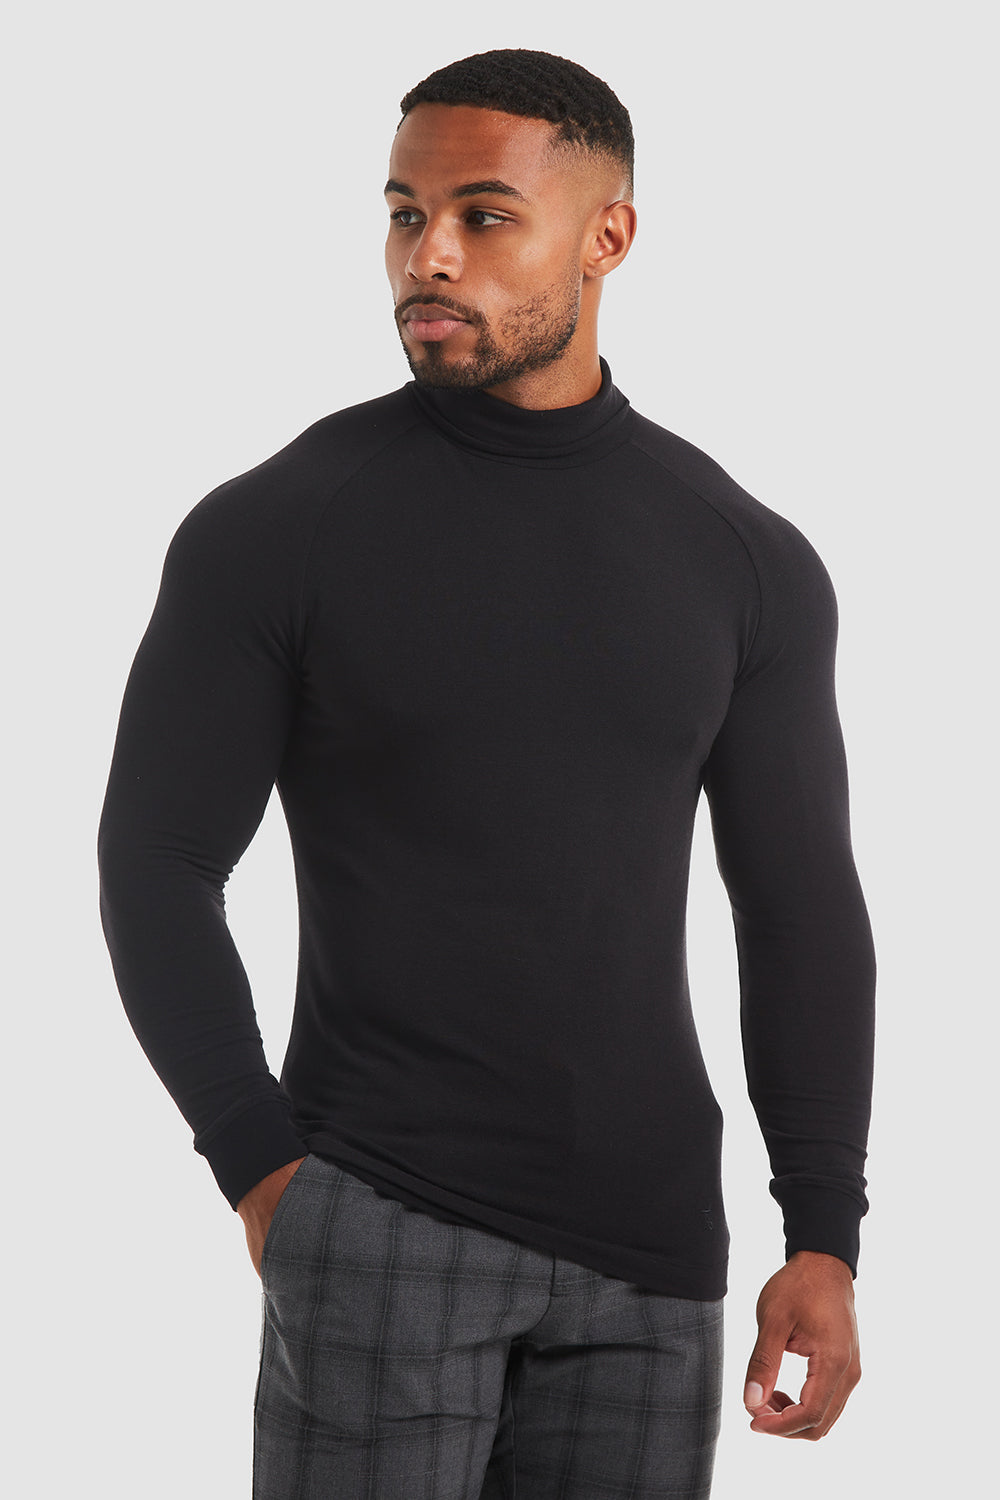 Knit Look Jersey Roll Neck (LS) in Black - TAILORED ATHLETE - USA